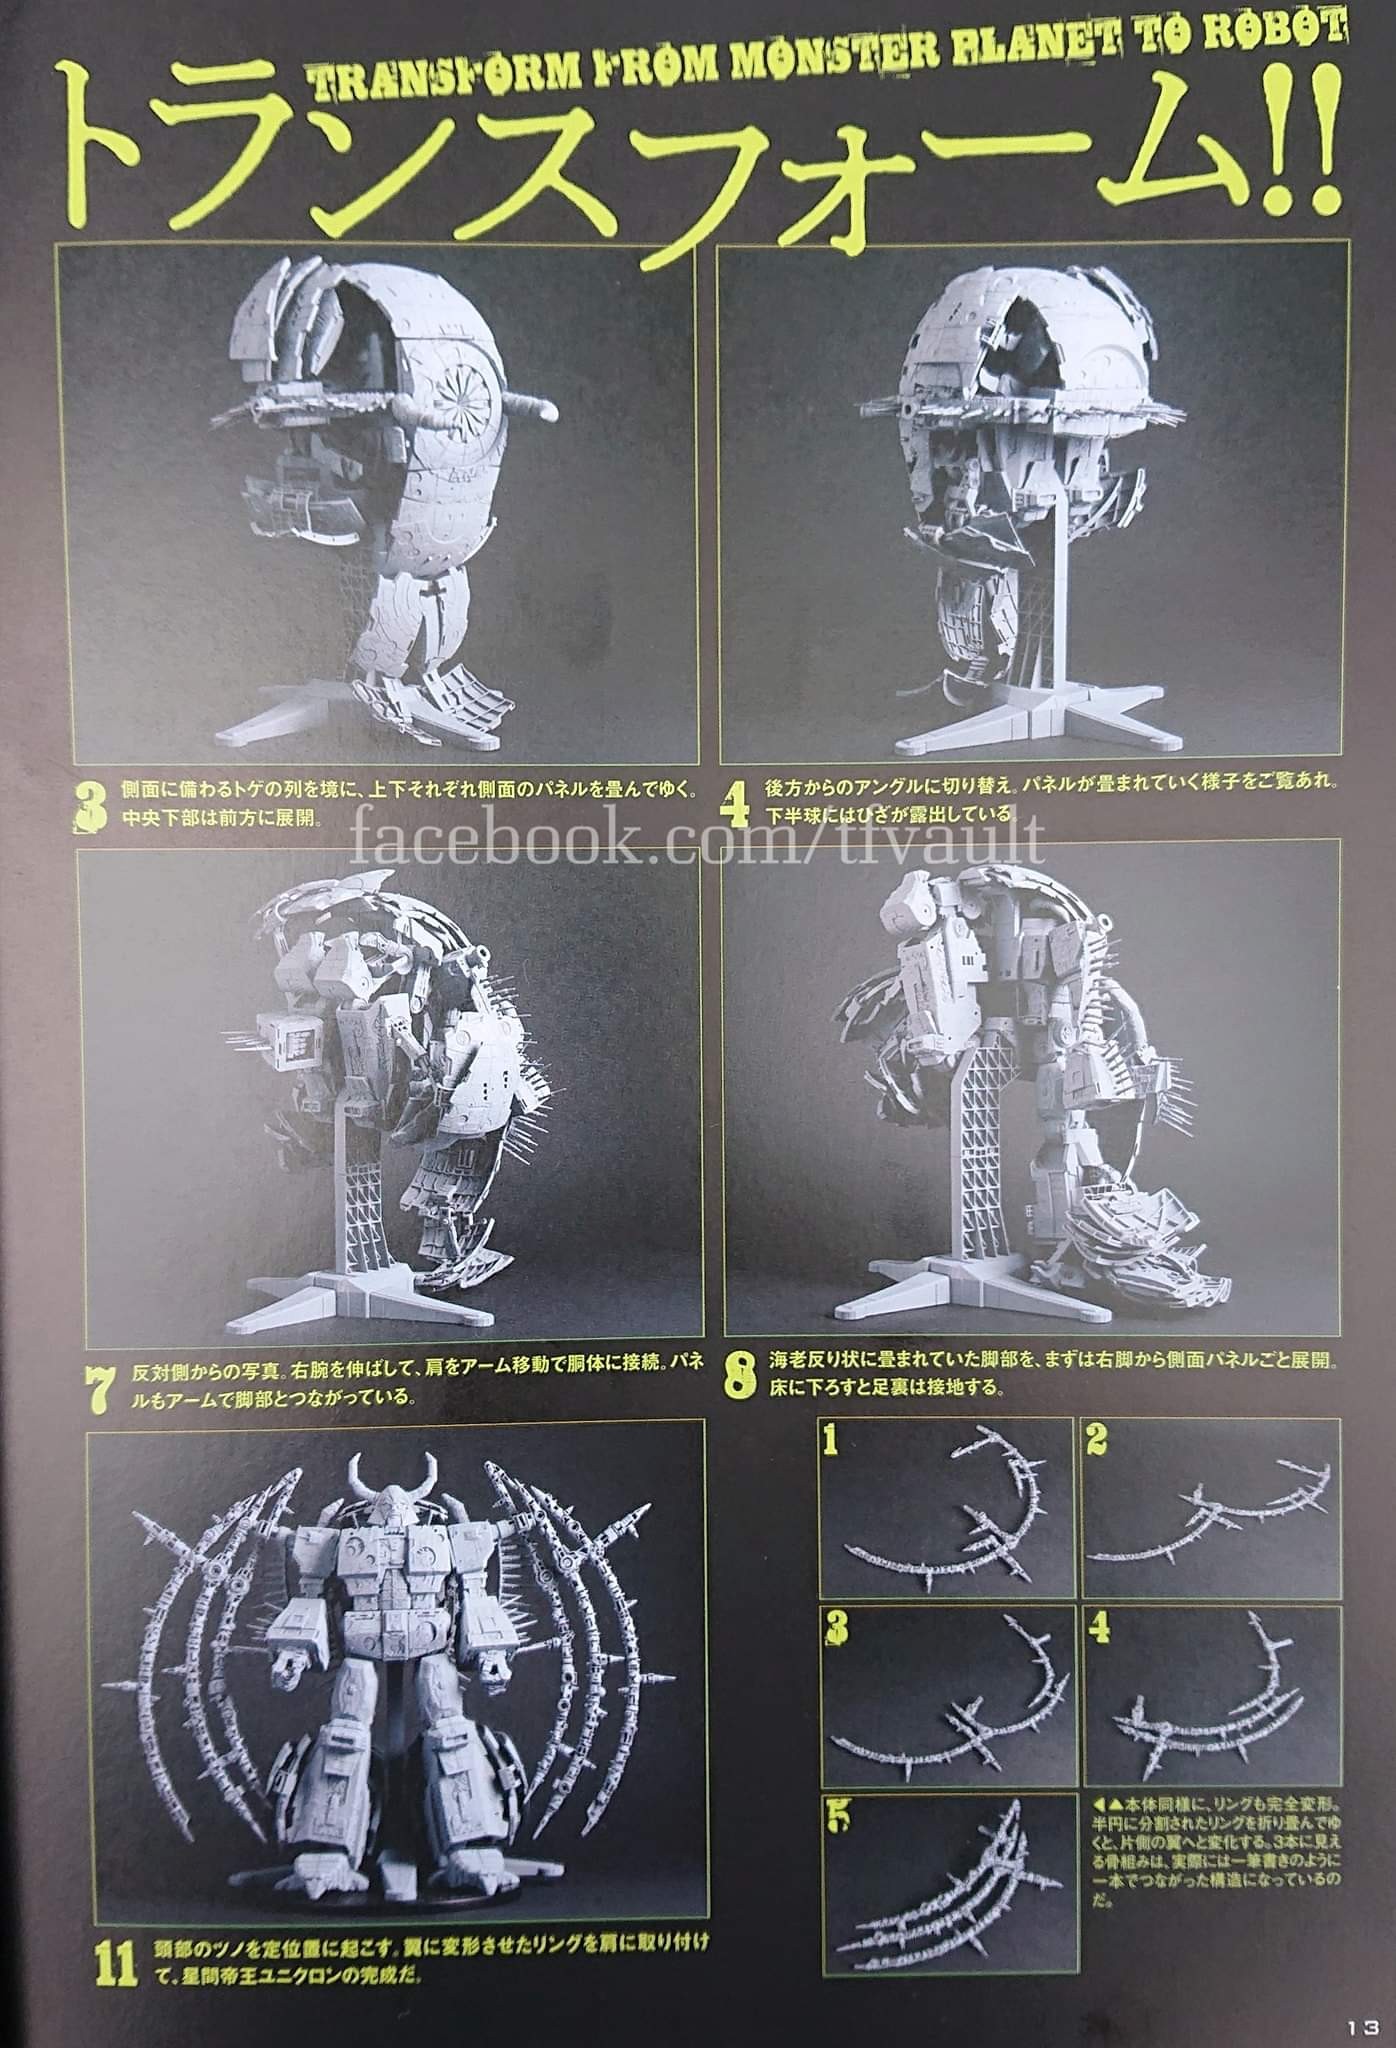 Transformers News: New Gray Prototype Images of HasLab Unicron